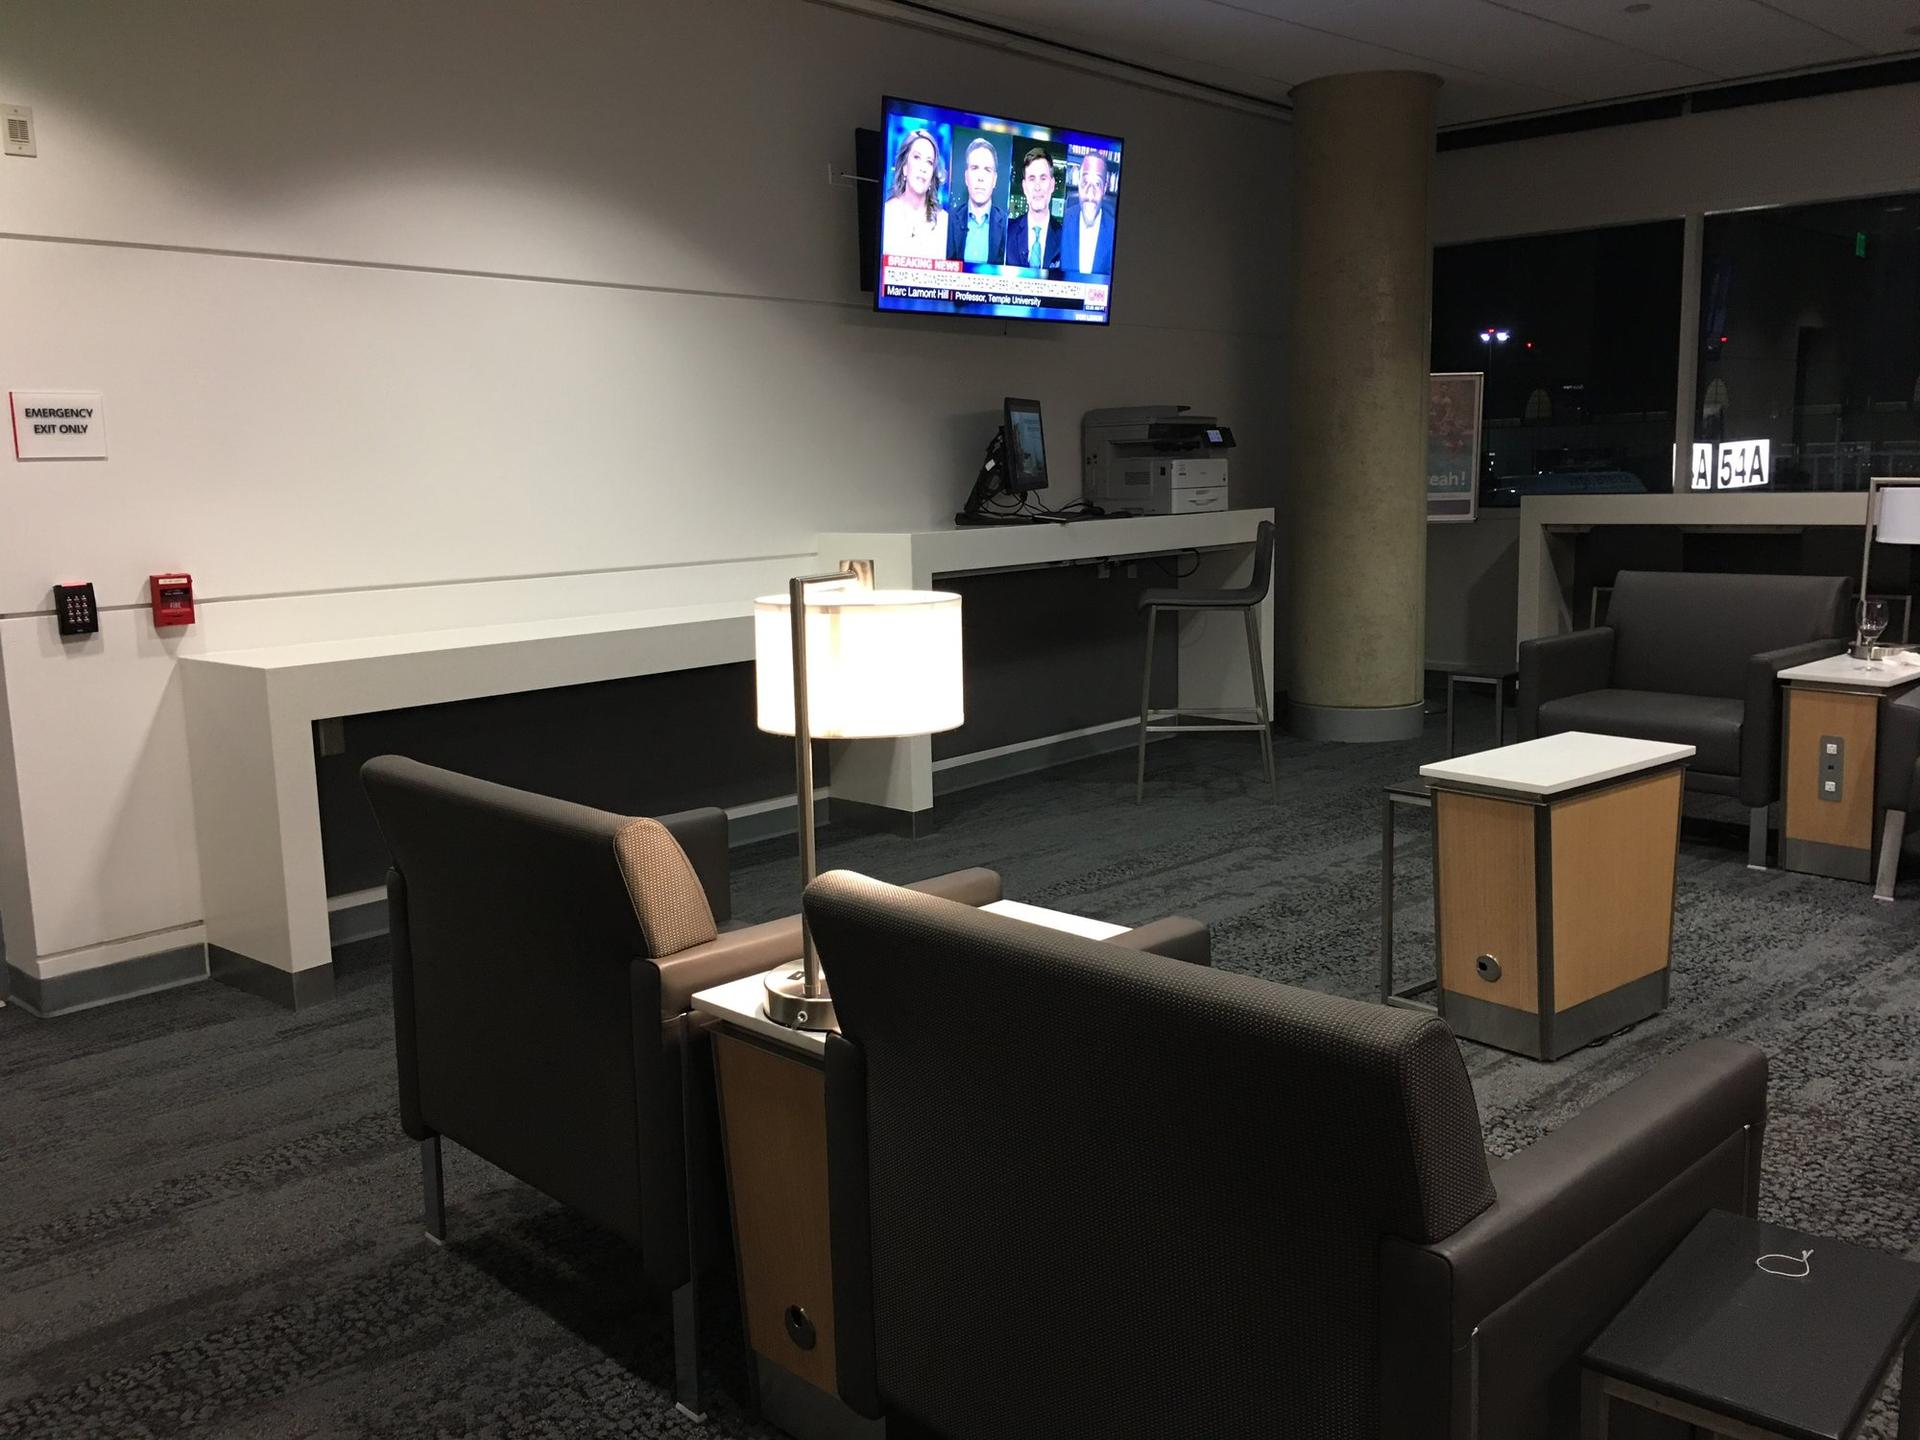 American Airlines Admirals Club image 12 of 38